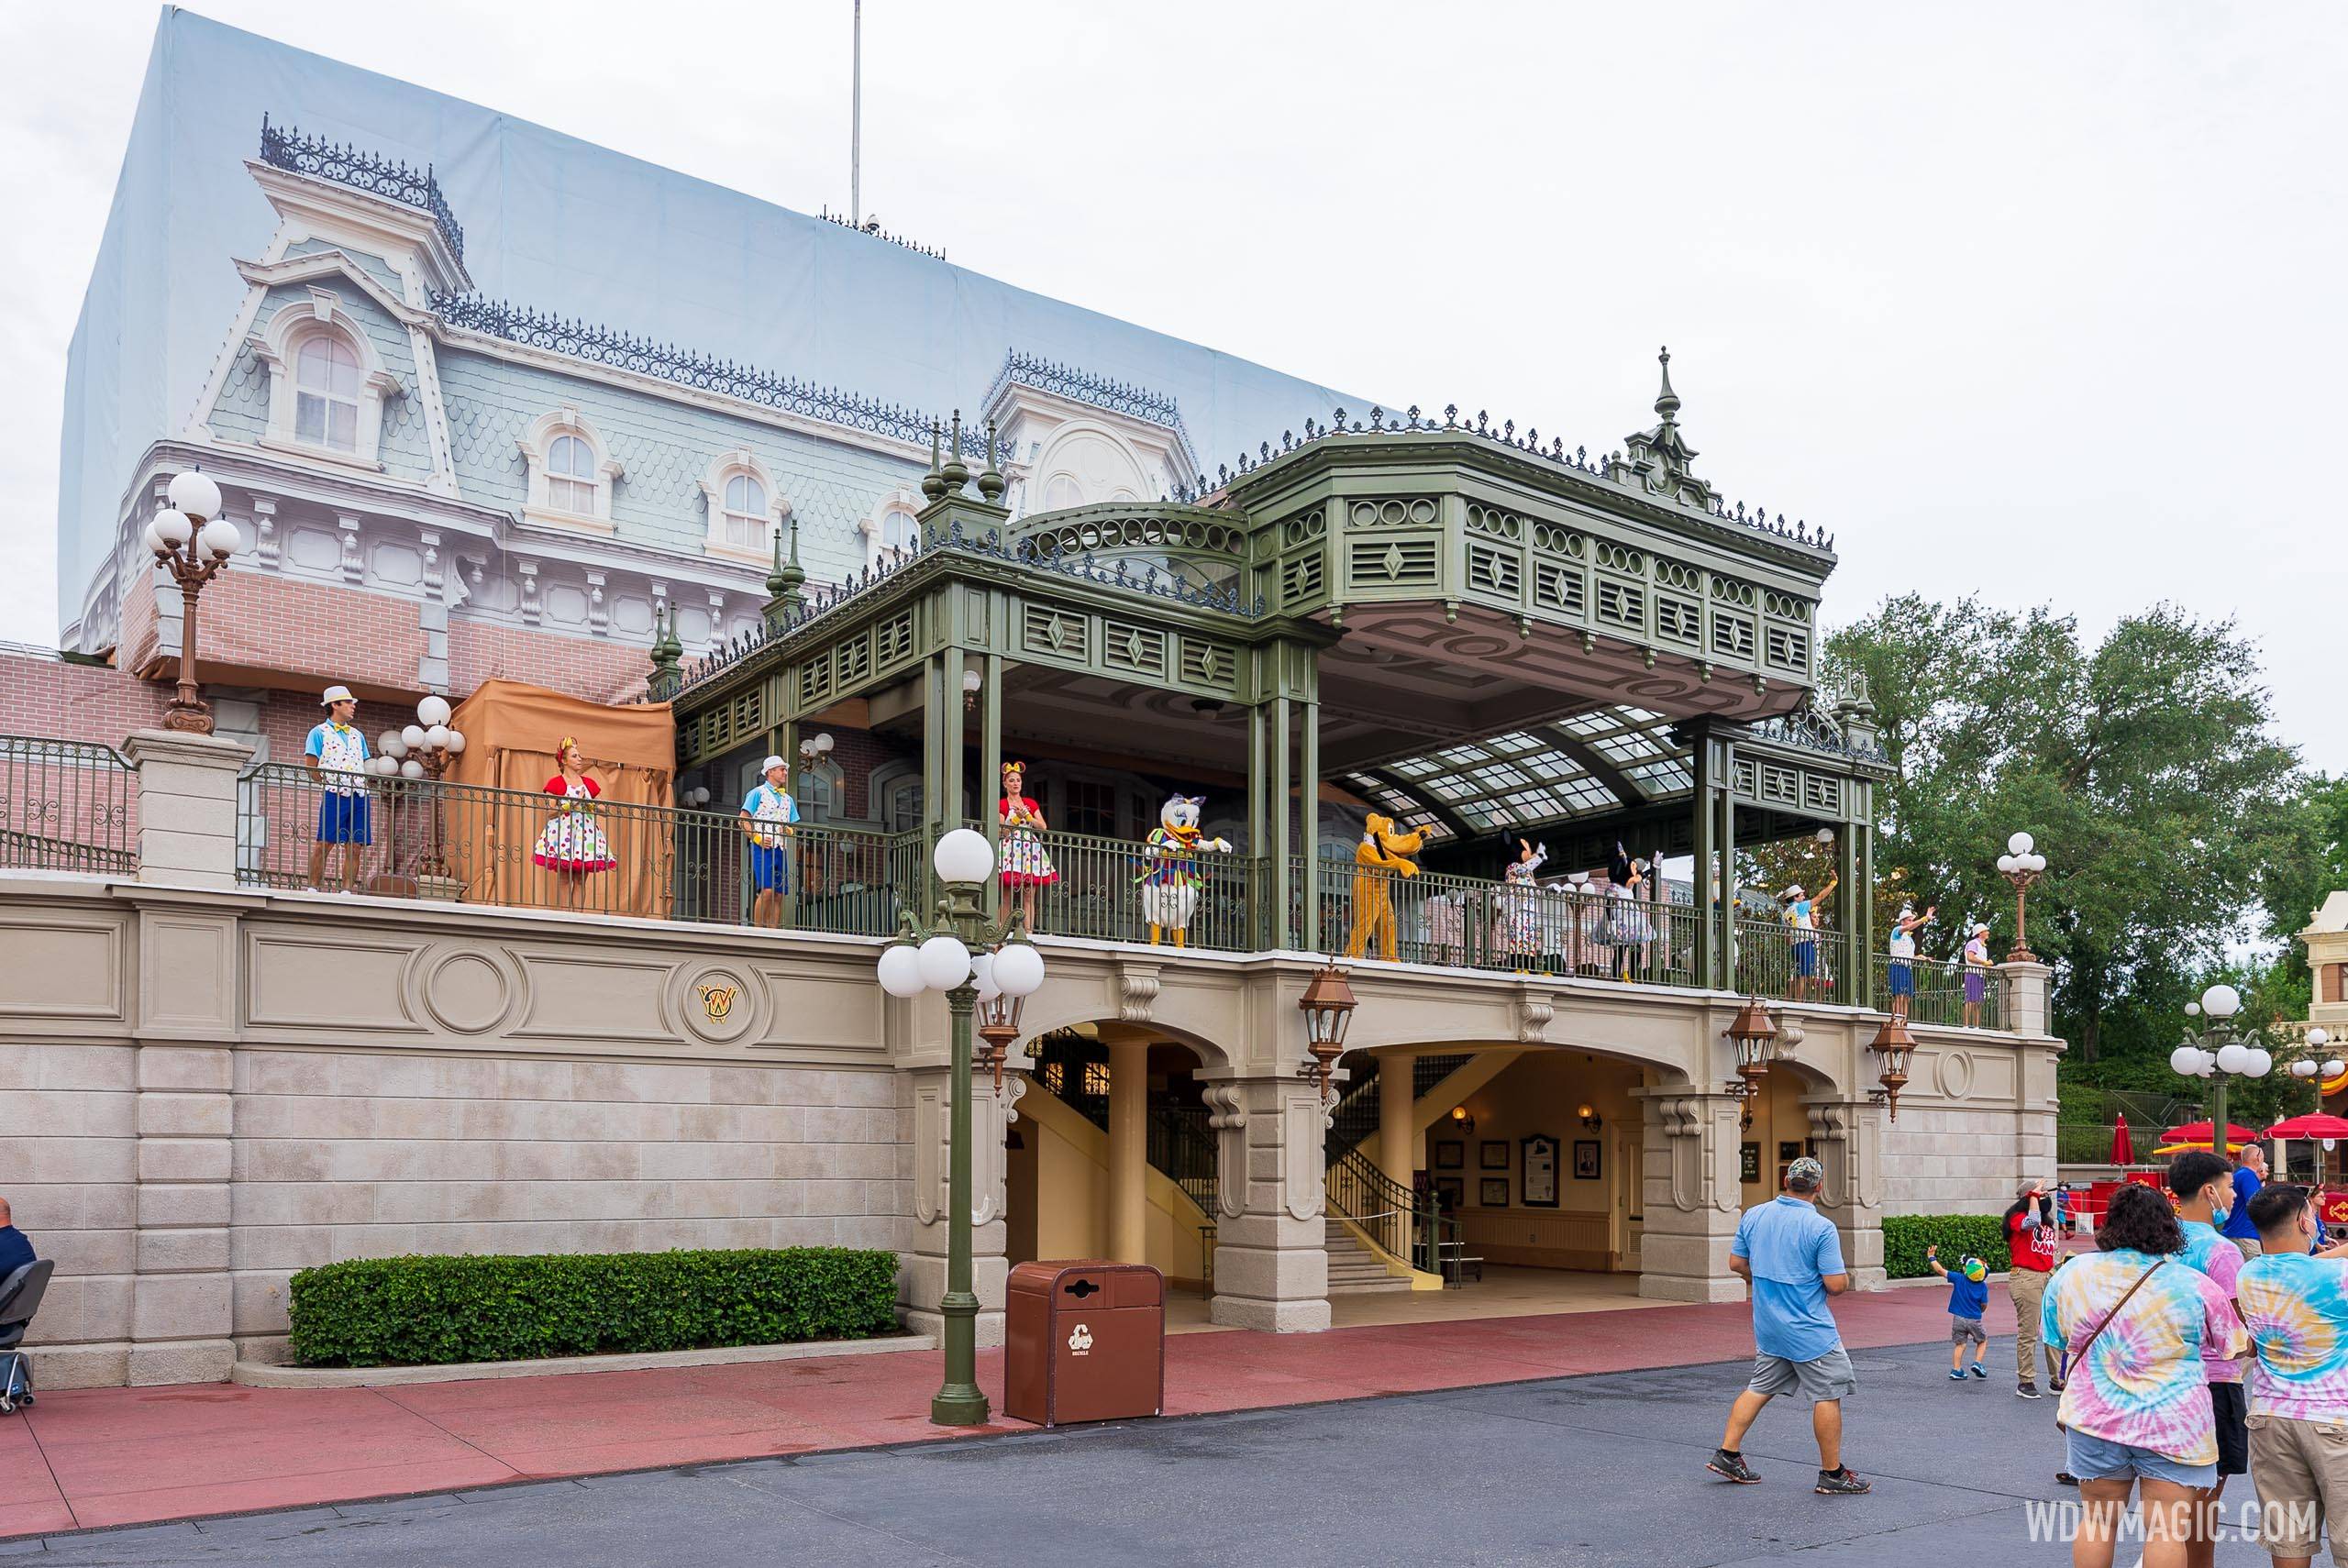 Main Street U.S.A Train Station balcony opens to guests for the first time  since the Magic Kingdom's reopening